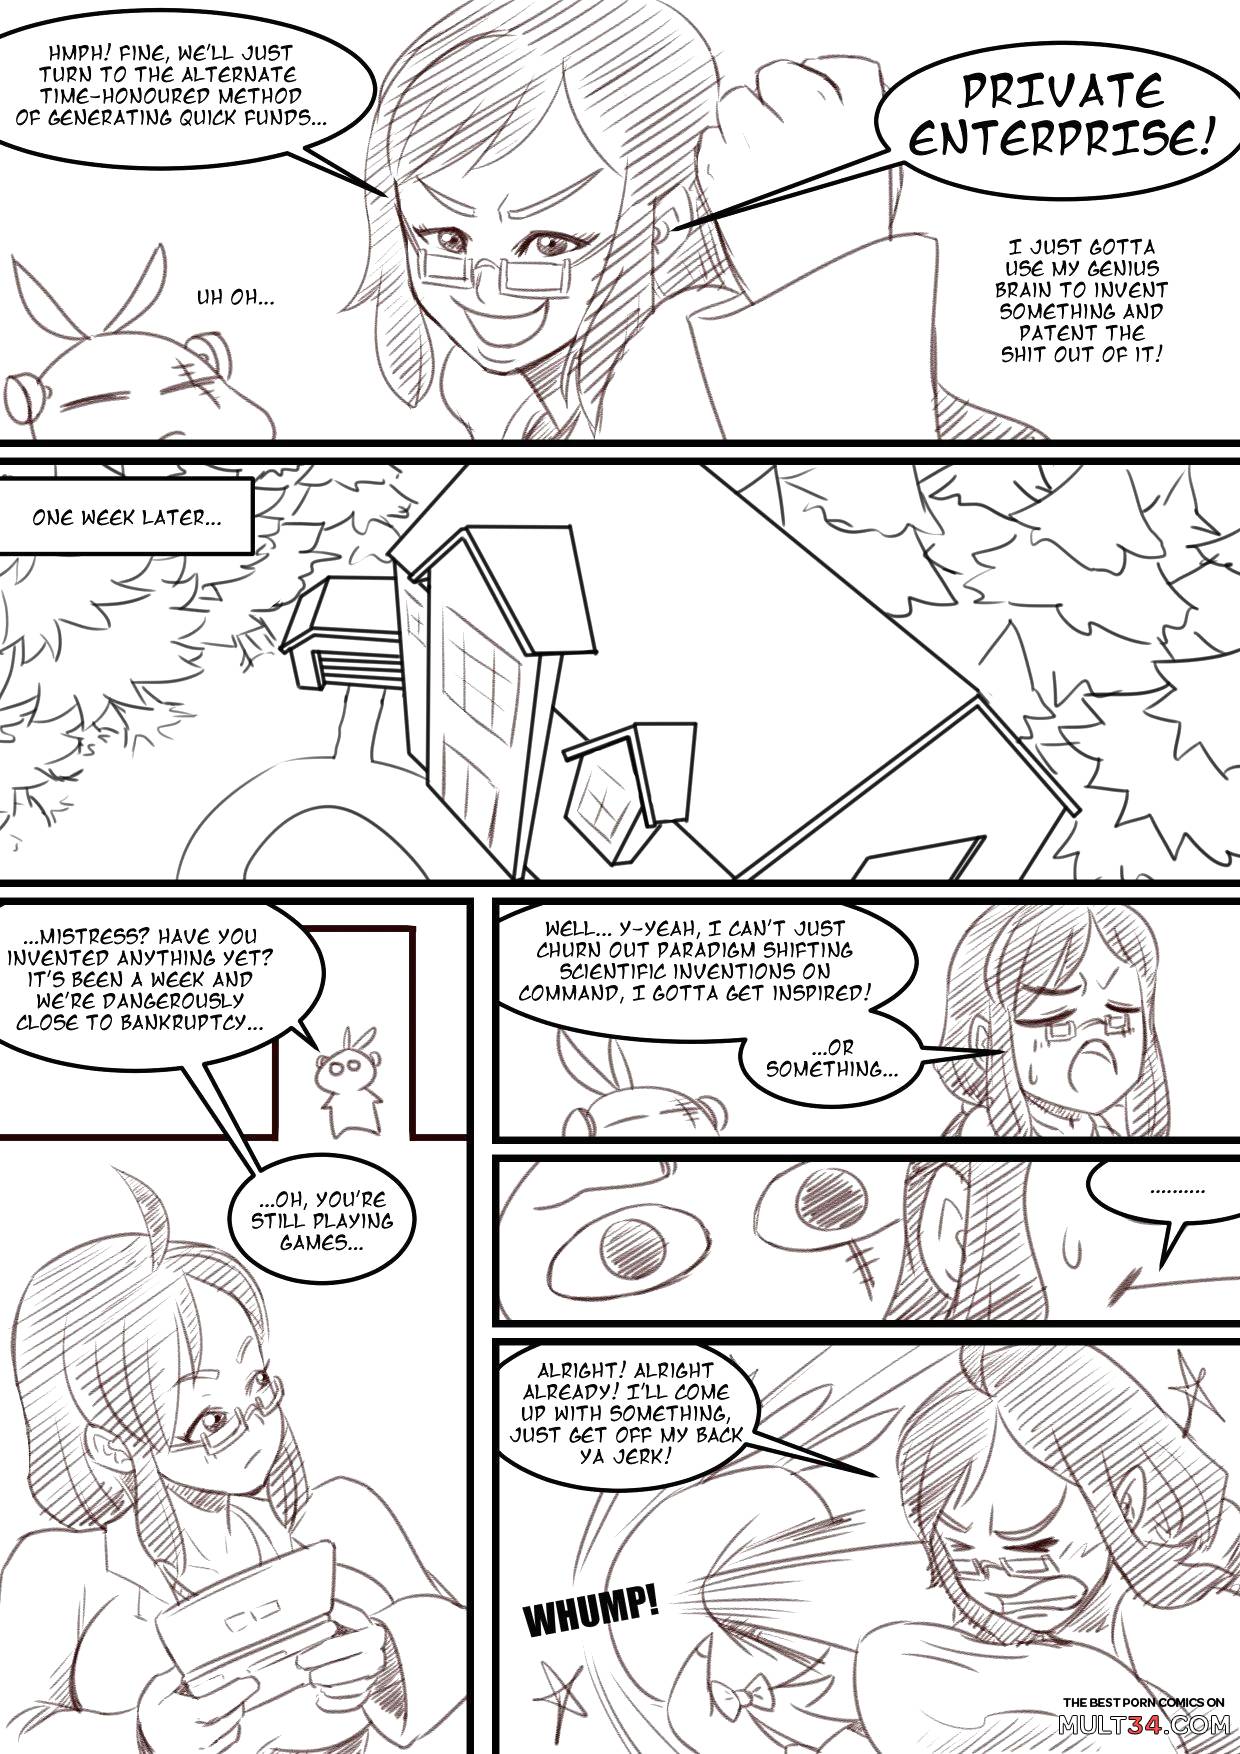 The Doppeler Effect page 5